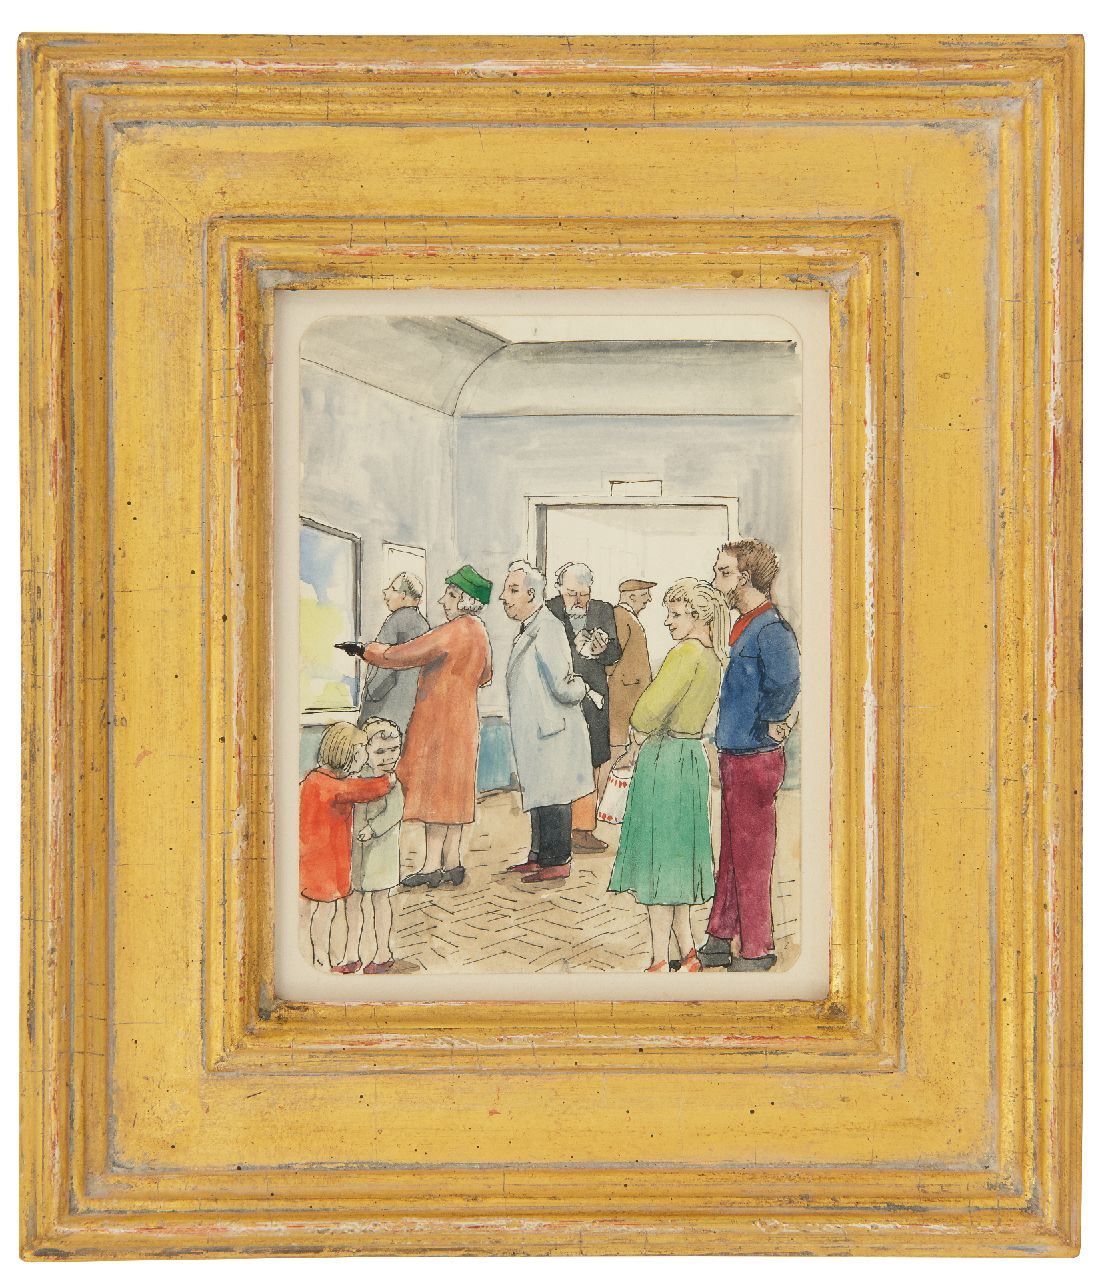 Kamerlingh Onnes H.H.  | 'Harm' Henrick Kamerlingh Onnes, The exhibition (with the painter himself in the middle), pen and ink and watercolour on paper 13.1 x 10.0 cm, signed on the reverse and painted in 1956